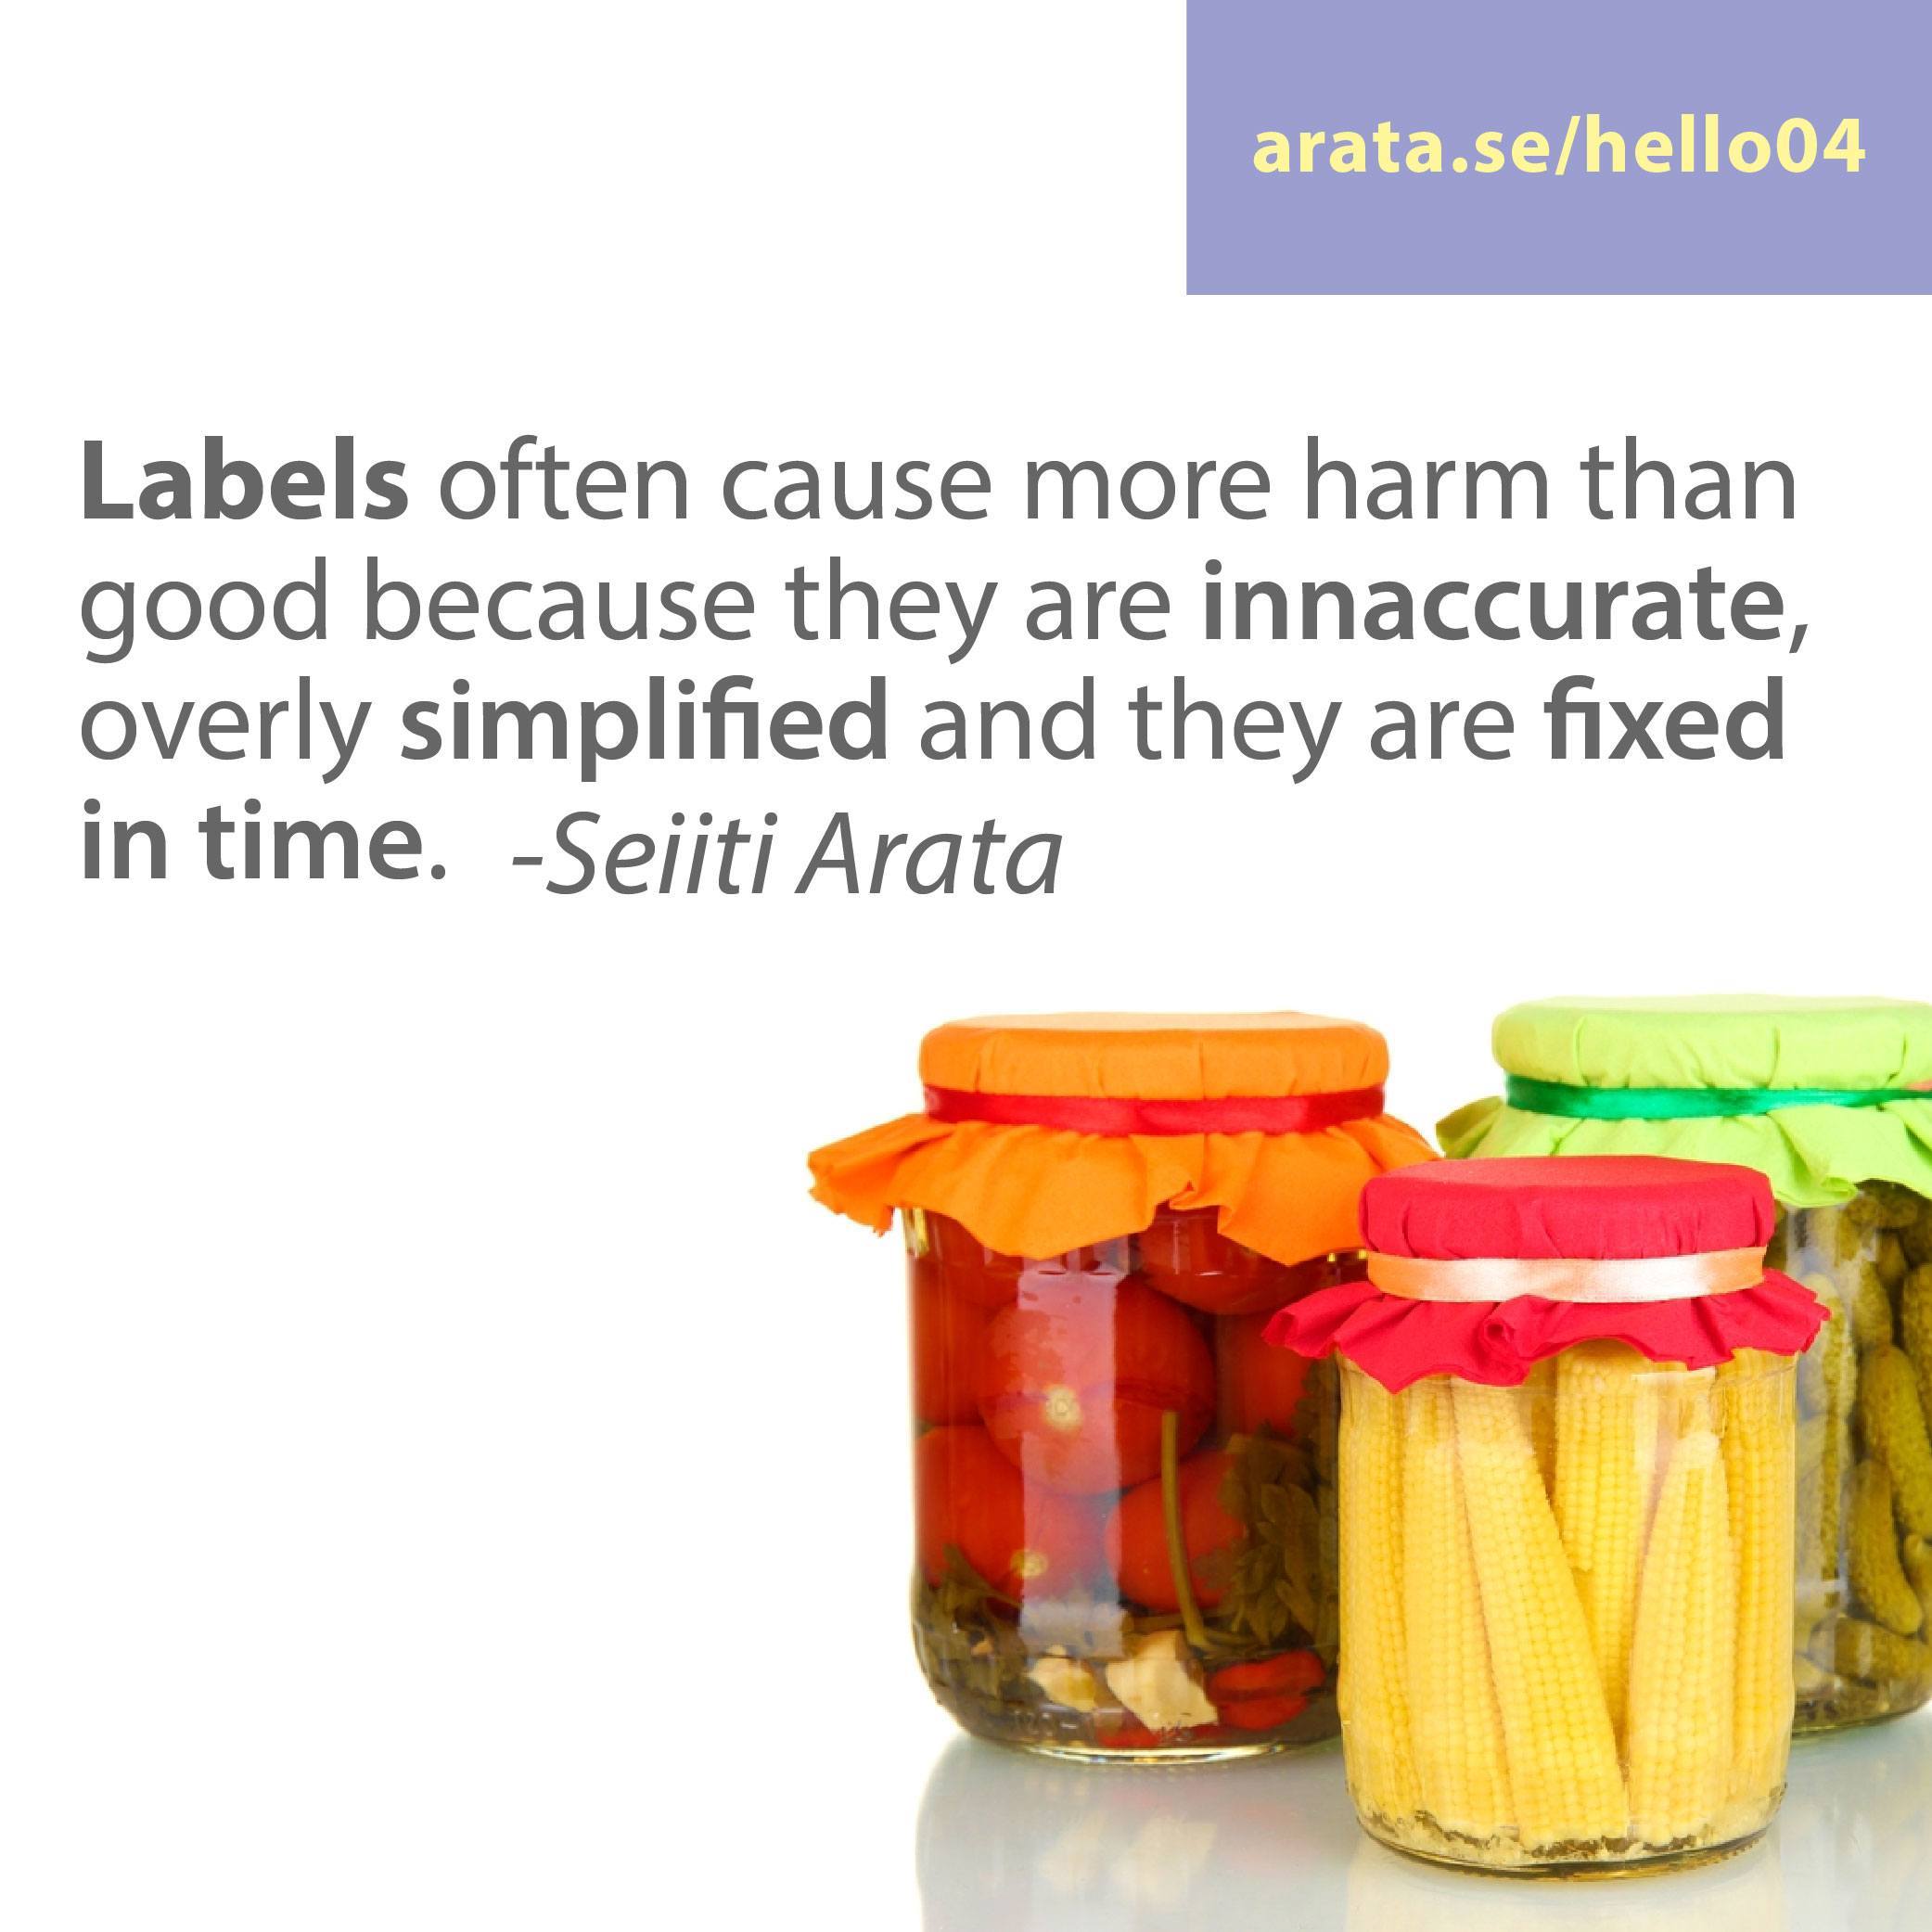 Please don’t label: Labels often cause more harm than good because they are innaccurate, overly simplified and they are fixed in time.